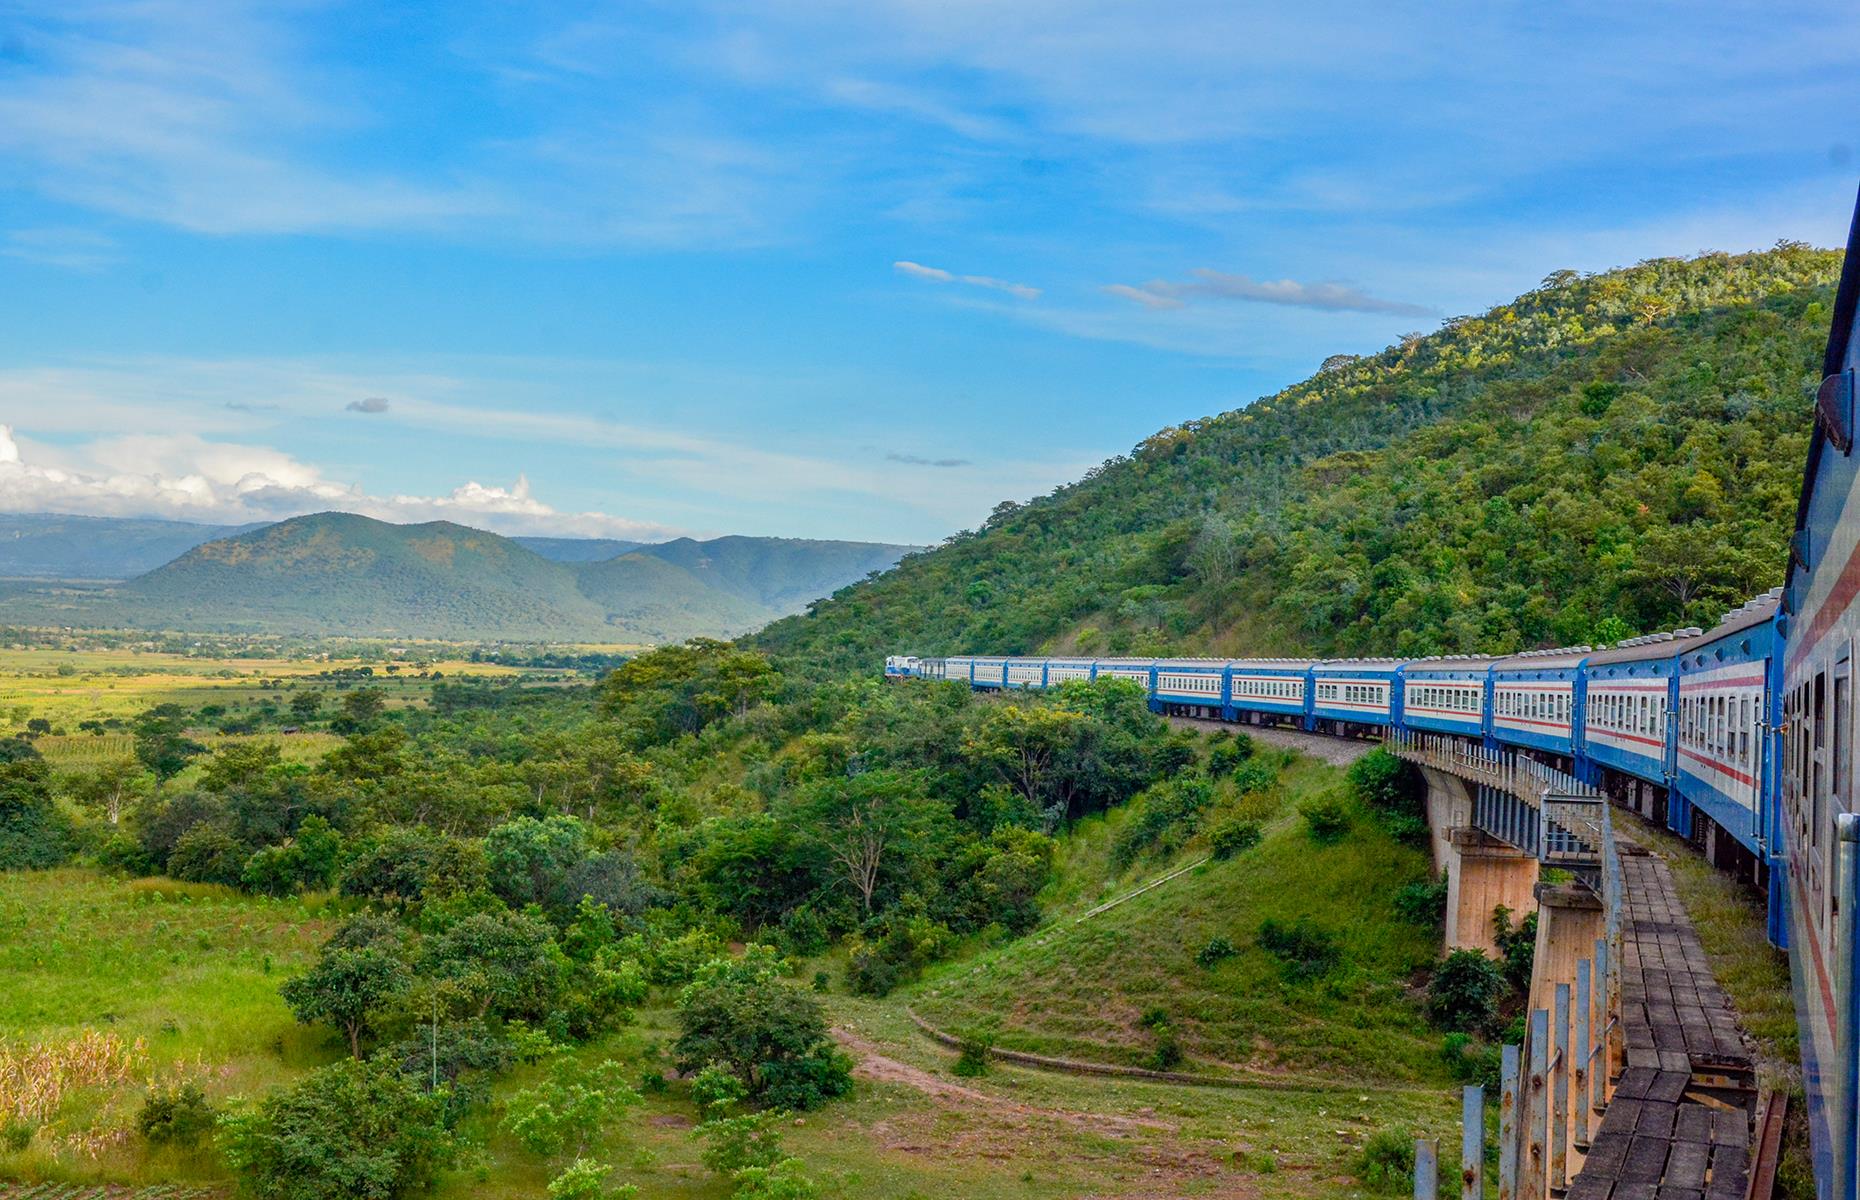 The TAZARA (Tanzania & Zambia Railway Authority) route is a great way of experiencing a safari without splashing out. The train travels from Dar es Salaam in Tanzania to the Zambian town of Kapiri Mposhi through the Selous game reserve, offering a chance to spot elephants, lions, giraffes and more. The journey covers 1,155 miles (1,860km) and takes just under 48 hours to complete.